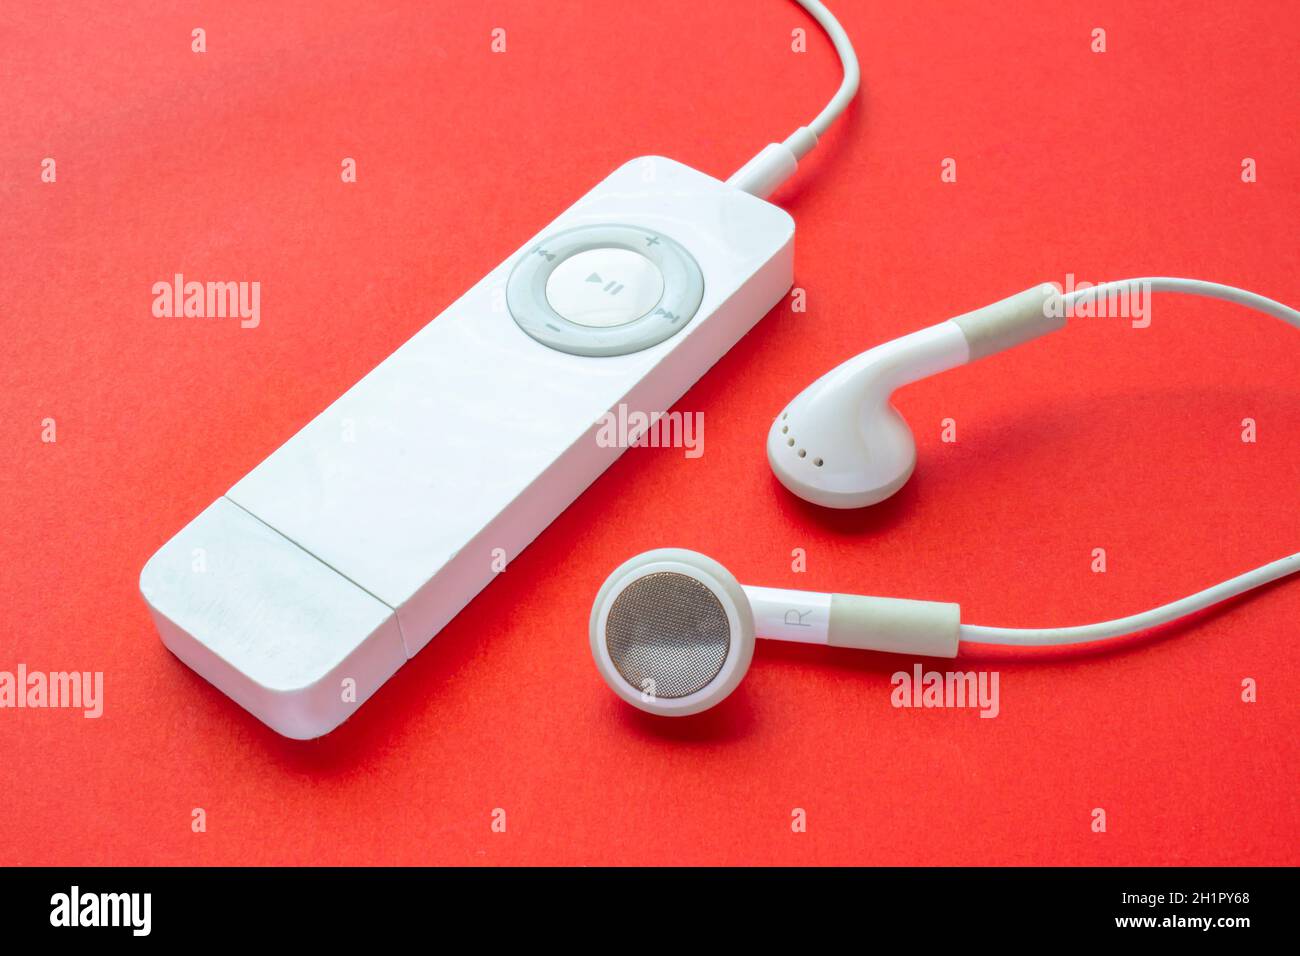 Calgary, Alberta, Canada. Feb 13, 2021. First-generation iPod Shuffle. A digital audio player designed and formerly marketed by Apple. The smallest mo Stock Photo